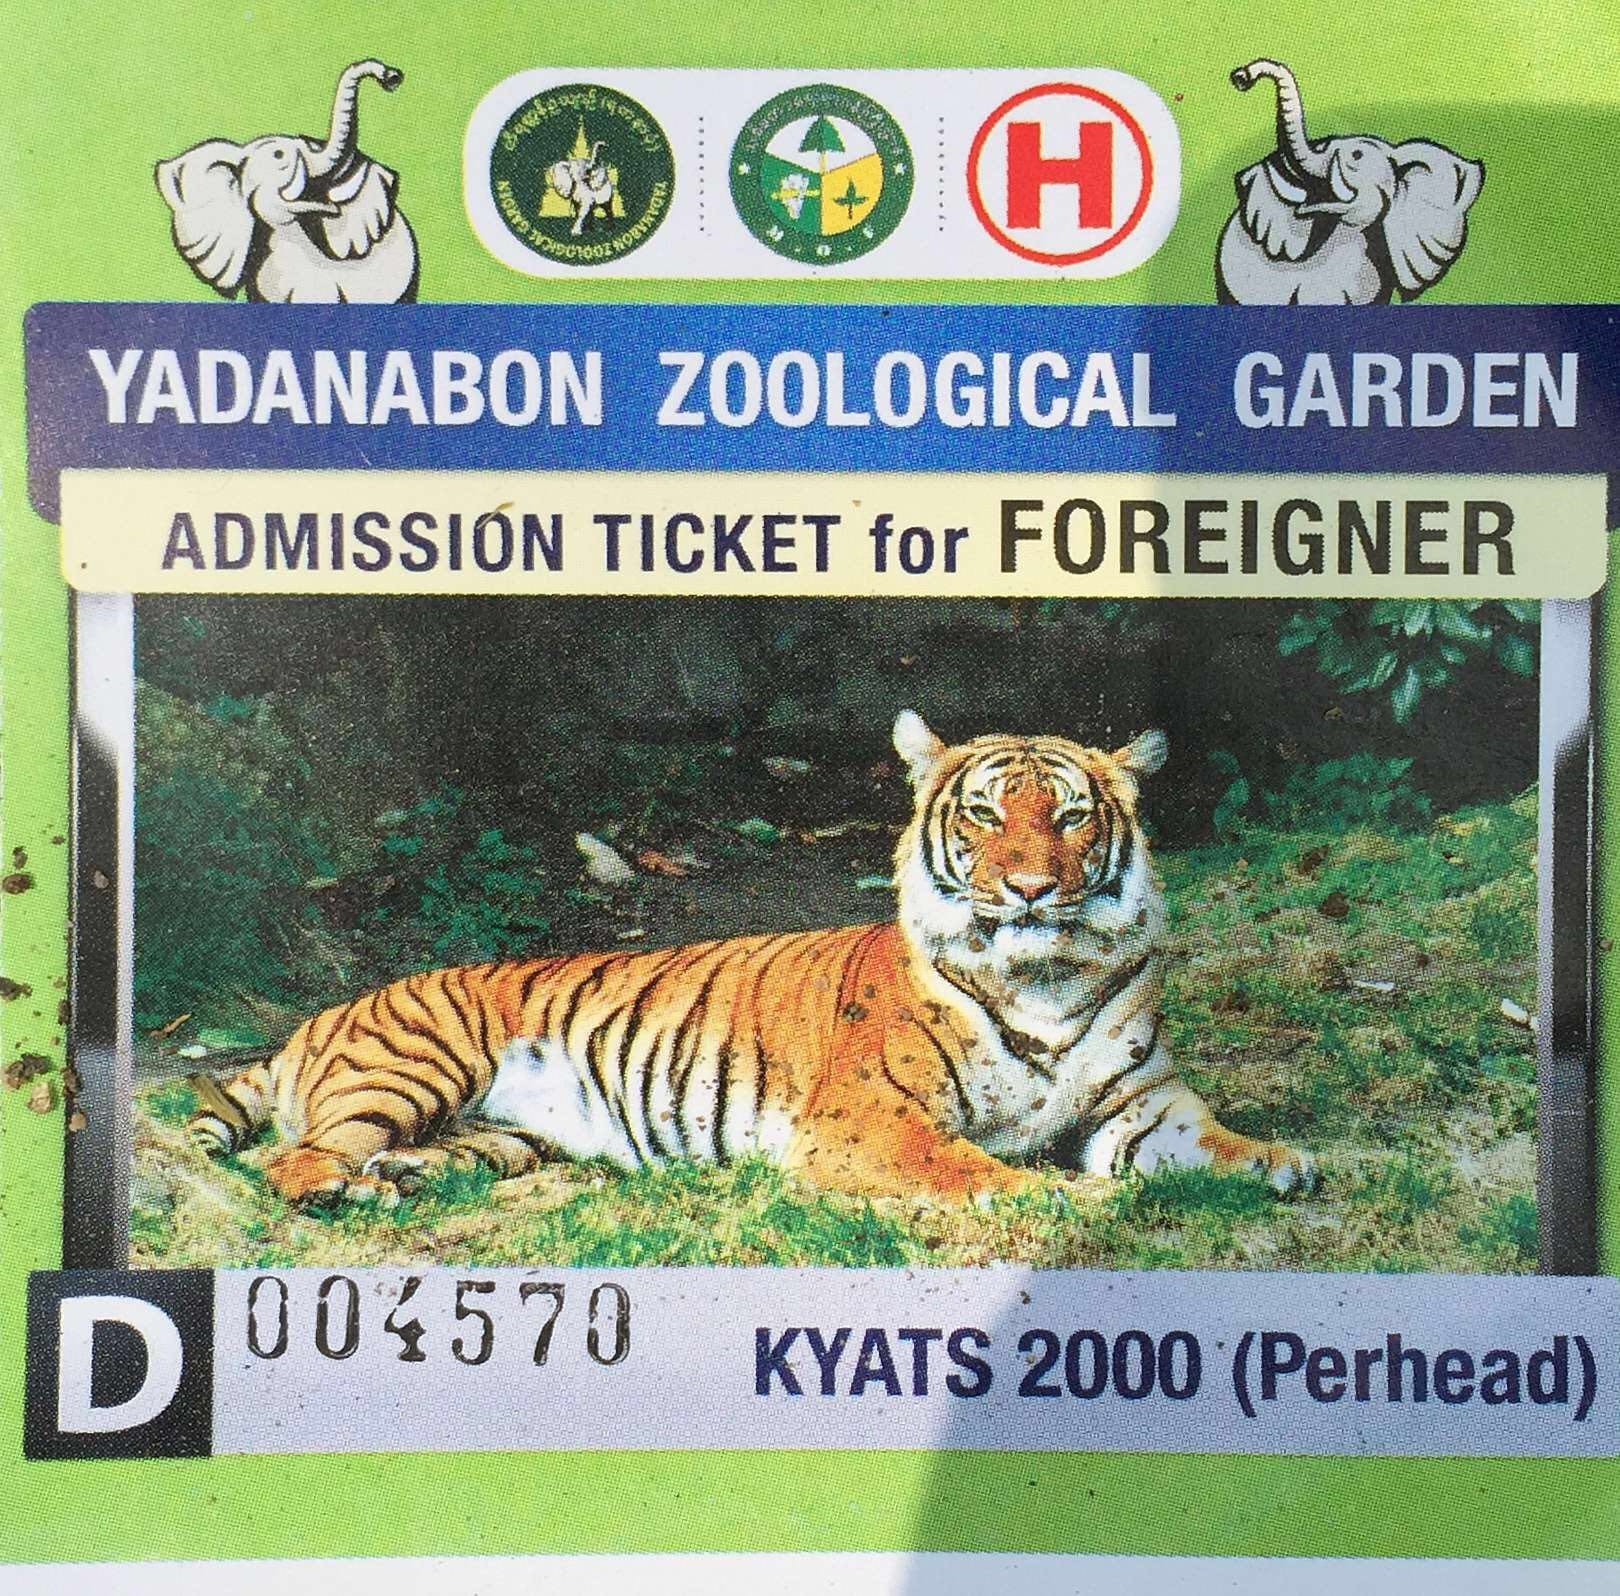 Photo by Author — my zoo ticket — was I only the 4,570th foreign visitor?